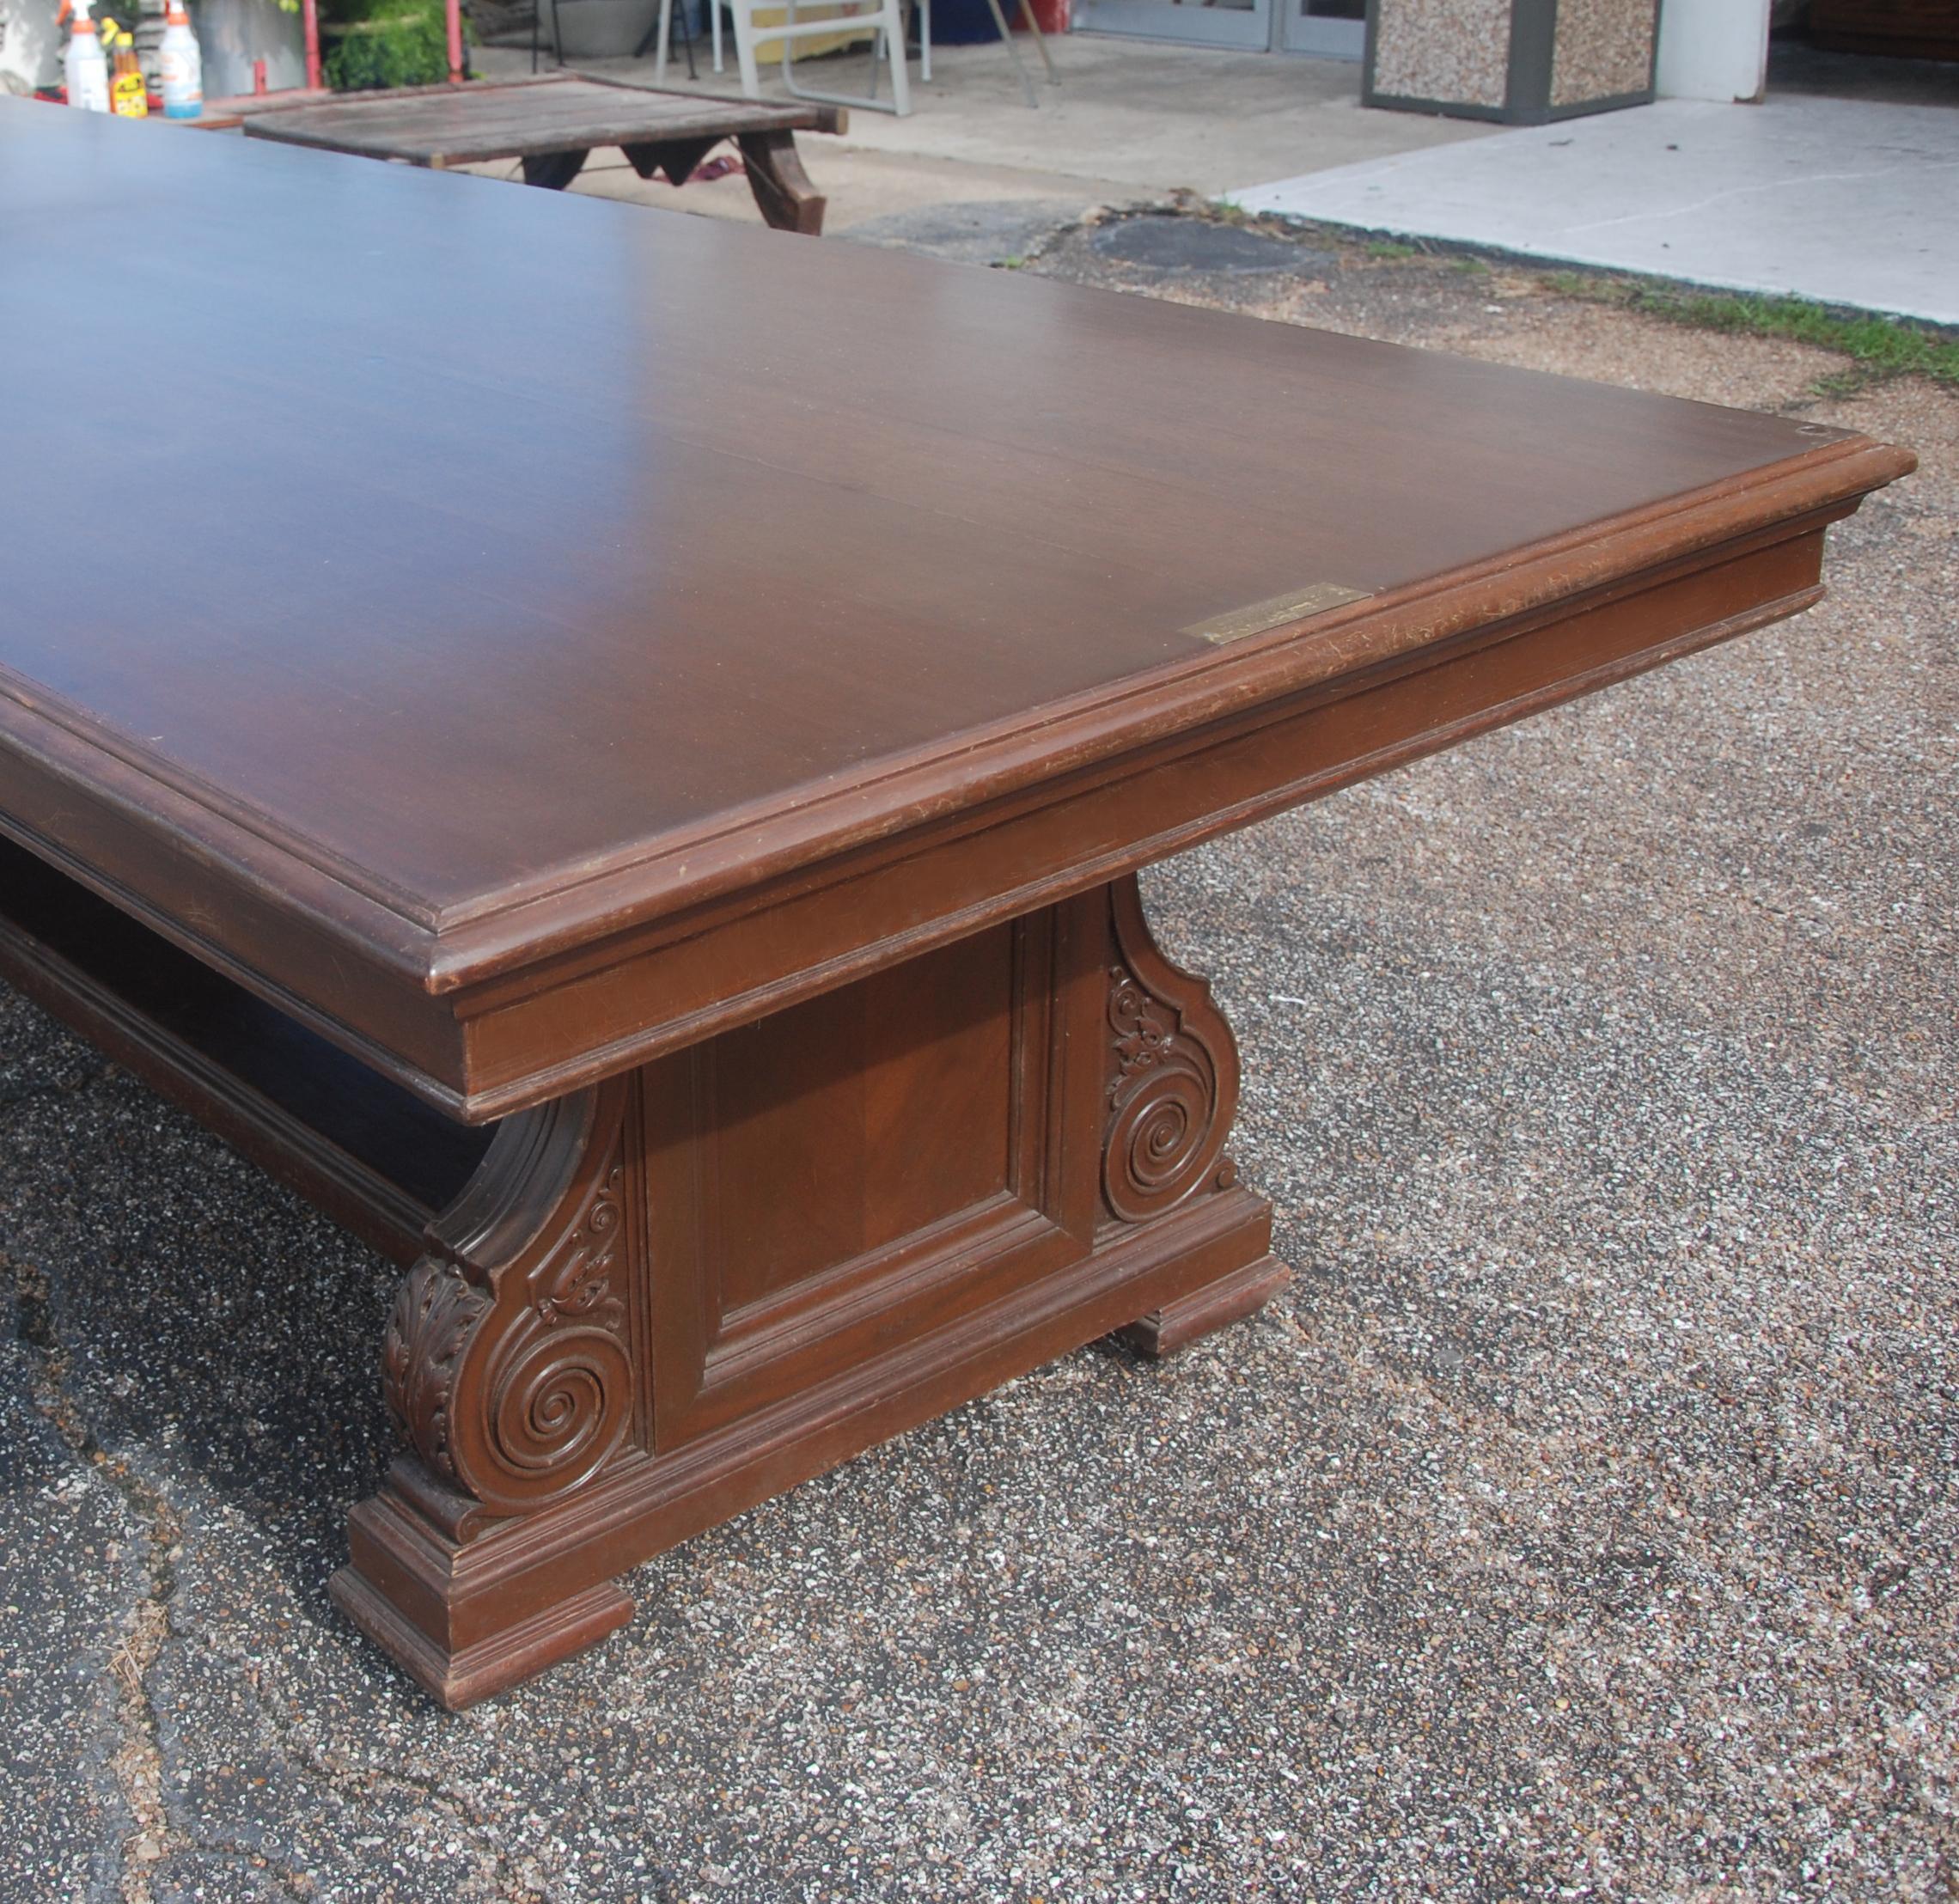 12 FT 1900s Royal Dutch/Shell Group Antique Oak Table   In Good Condition For Sale In Pasadena, TX